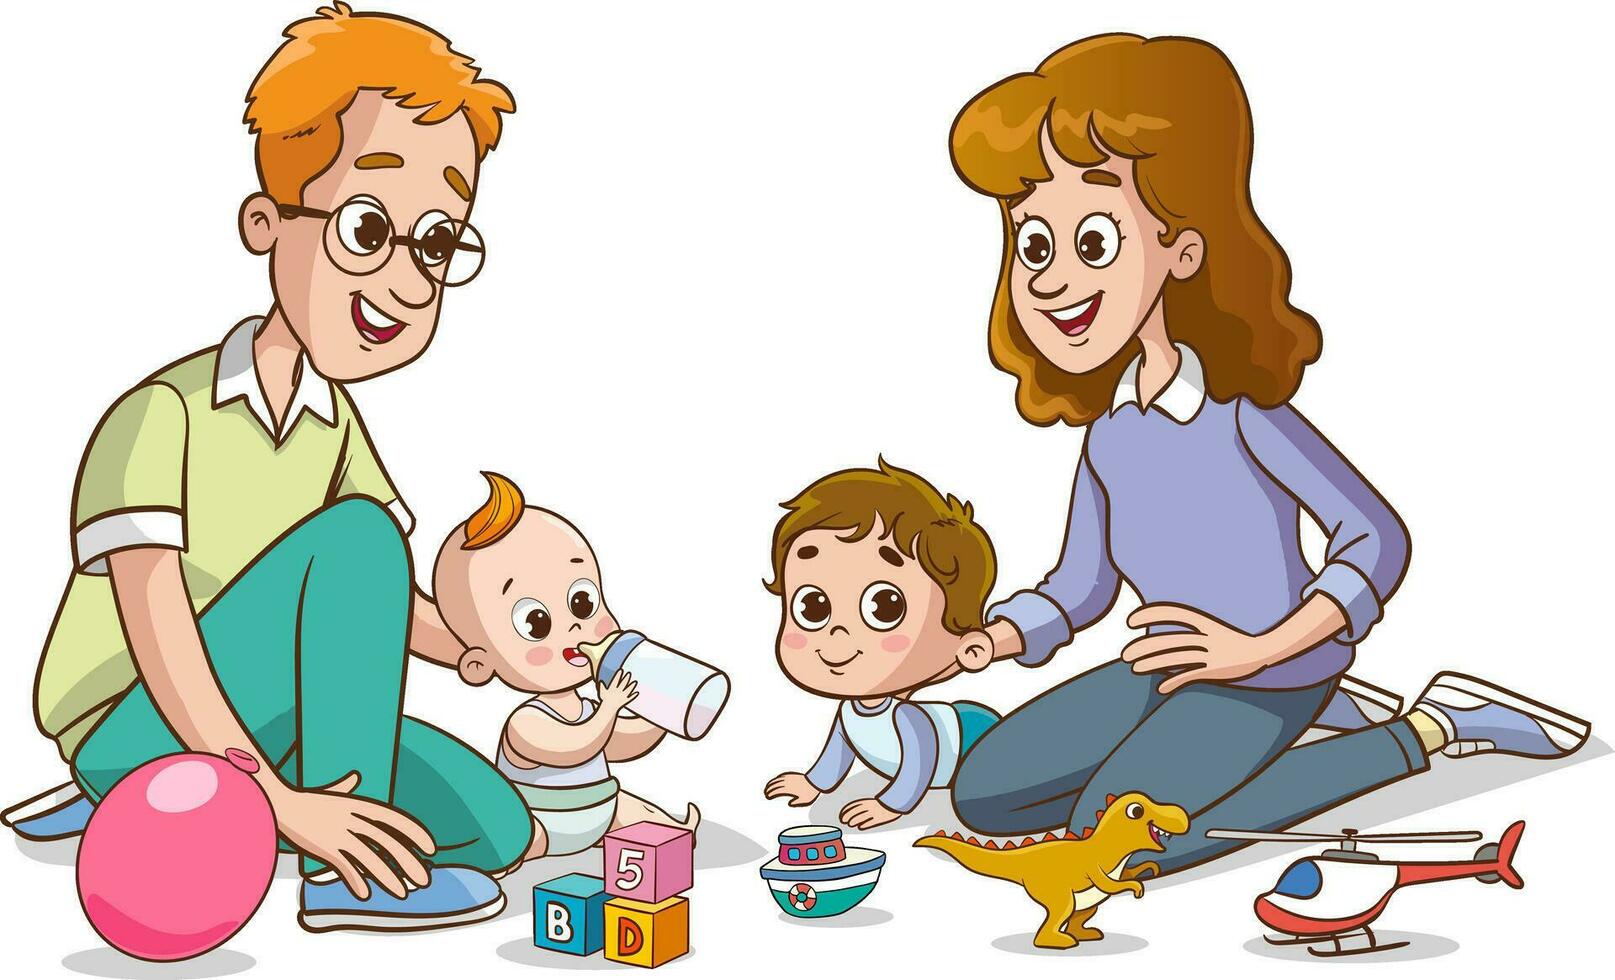 Mother and father playing with their baby. Vector illustration of a cartoon family.